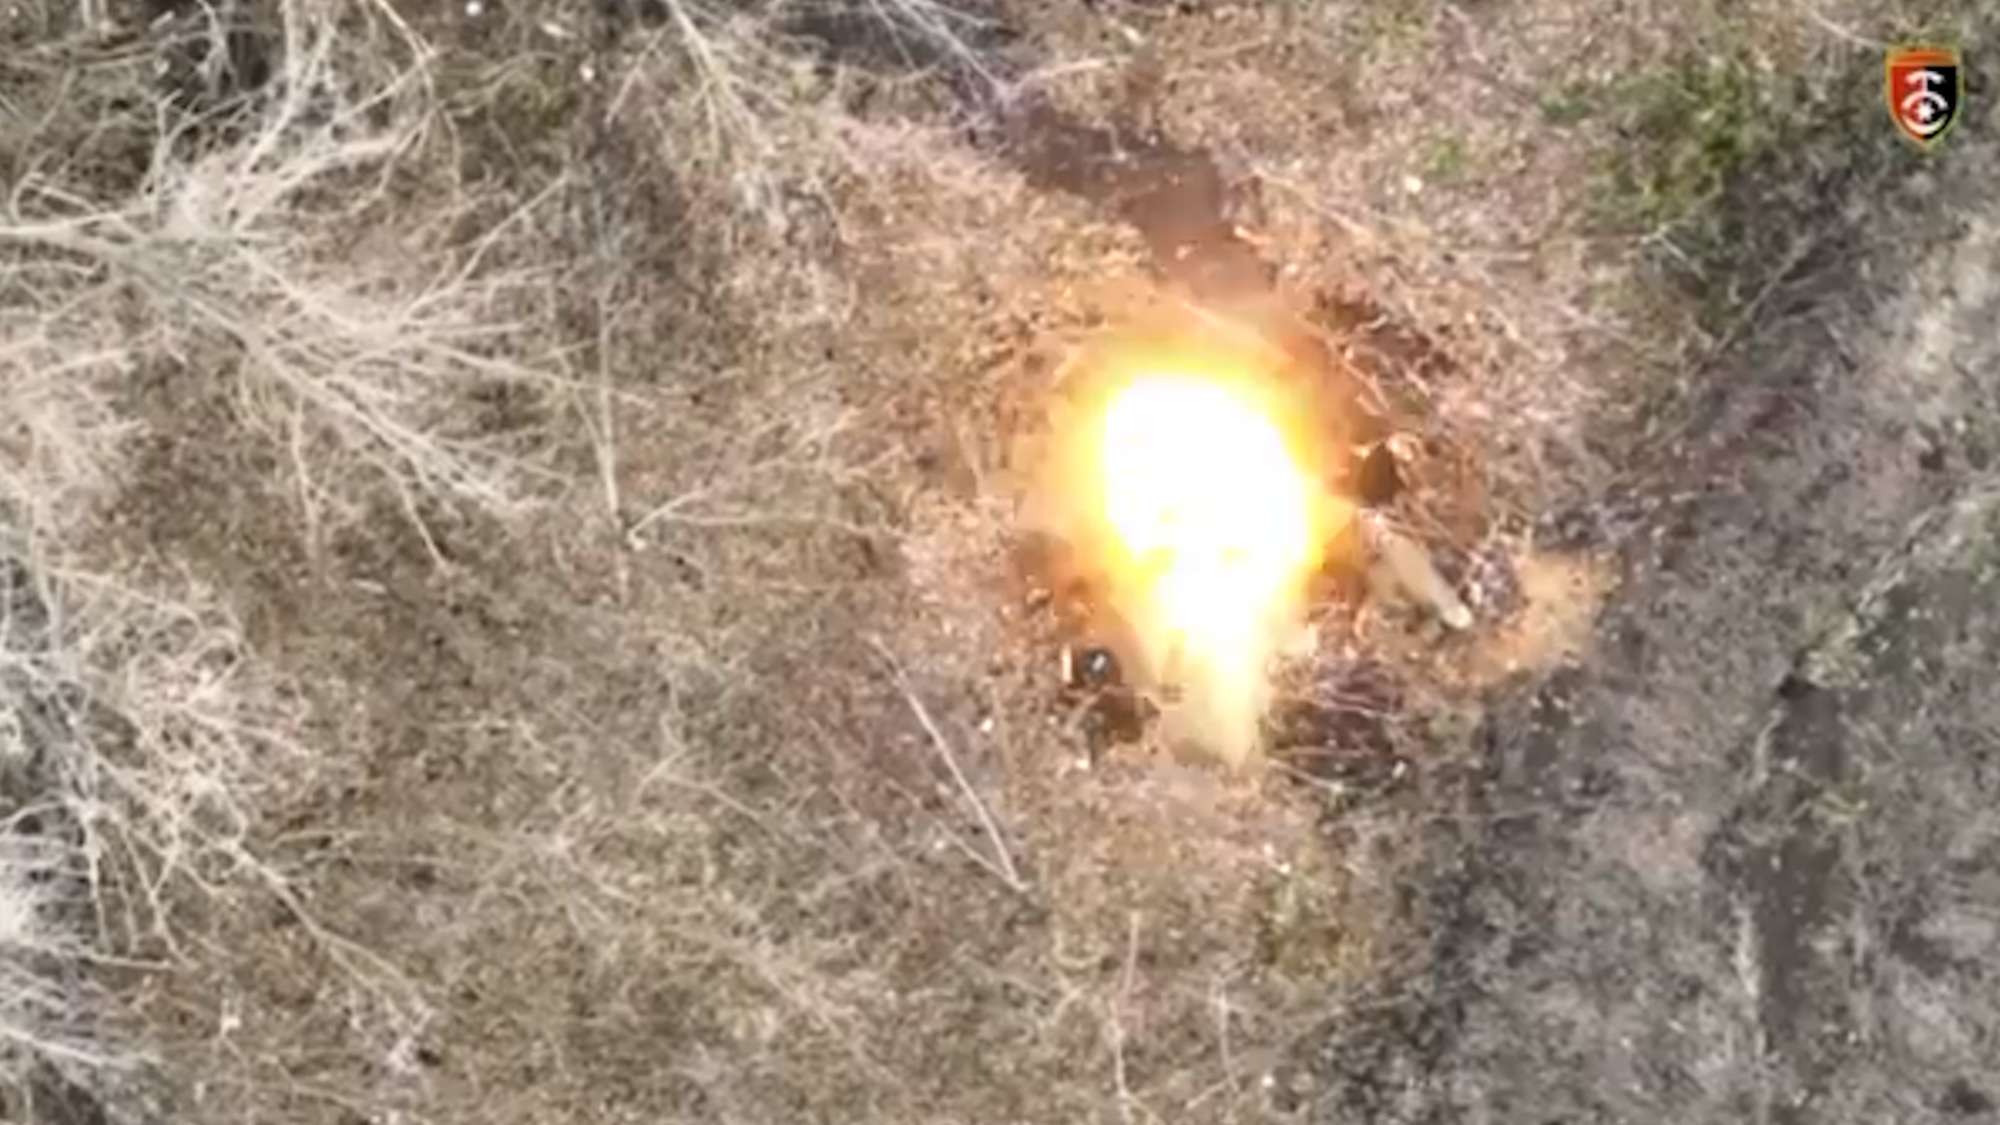 Ukrainian Drones Drop Numerous Bombs On Russian Dugouts As Troops Flee For Cover